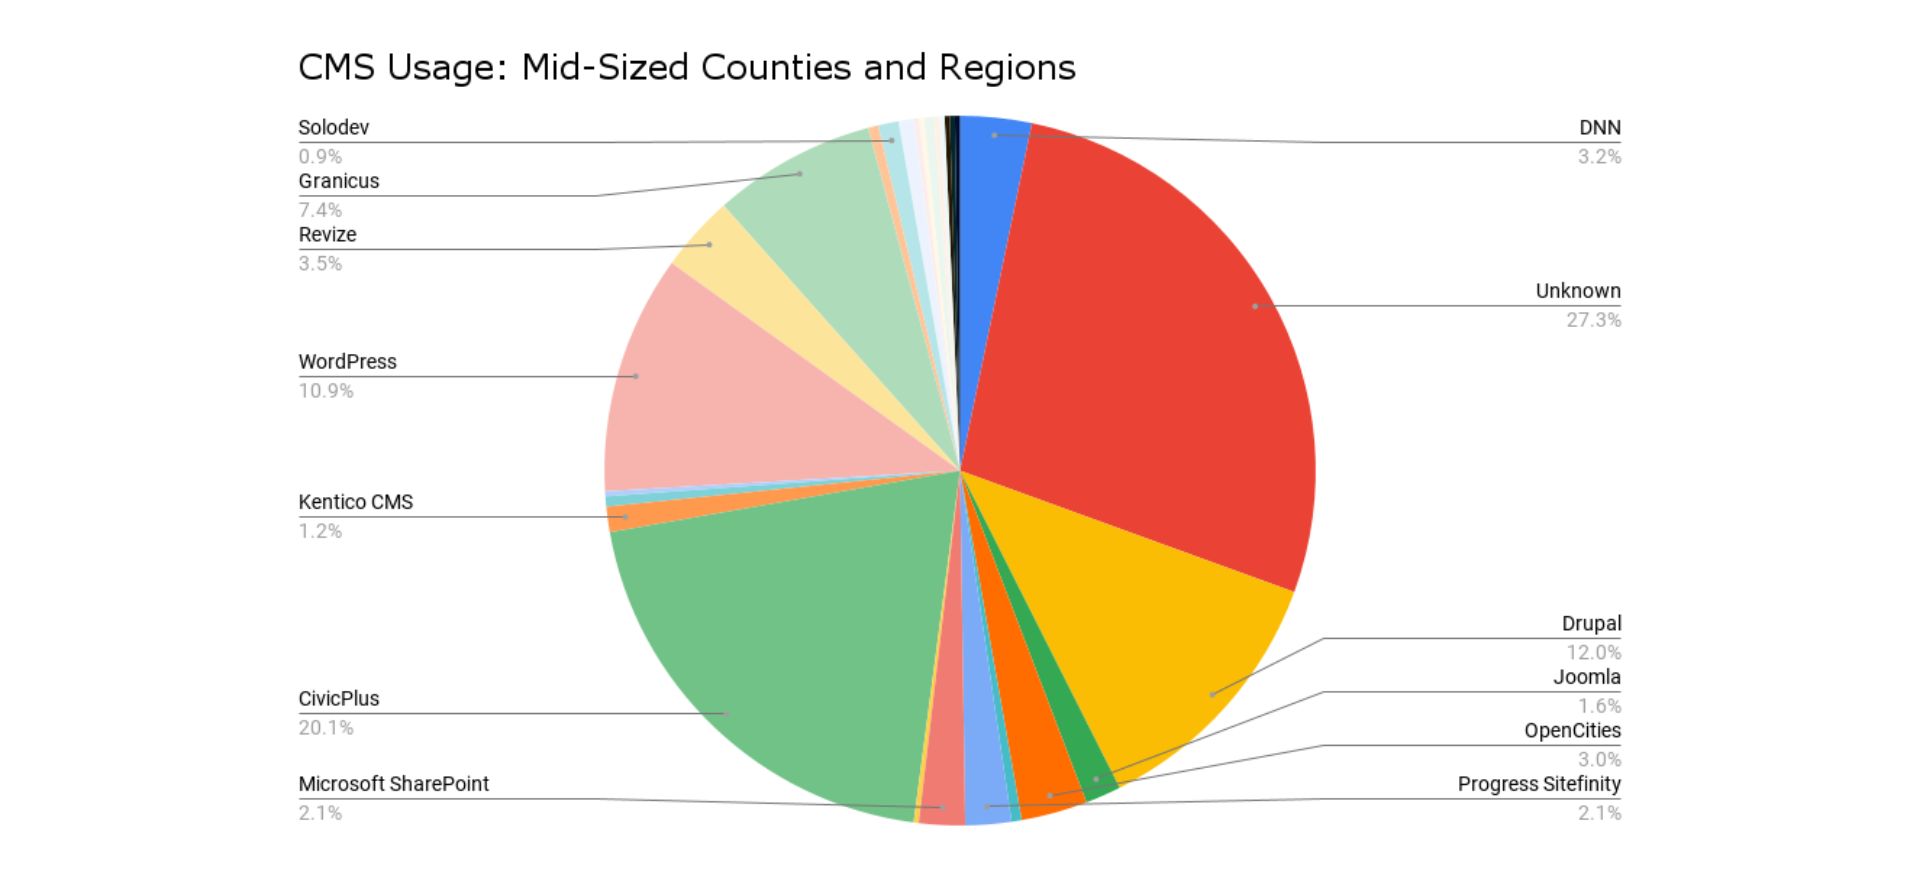 cms usage: midsized counties